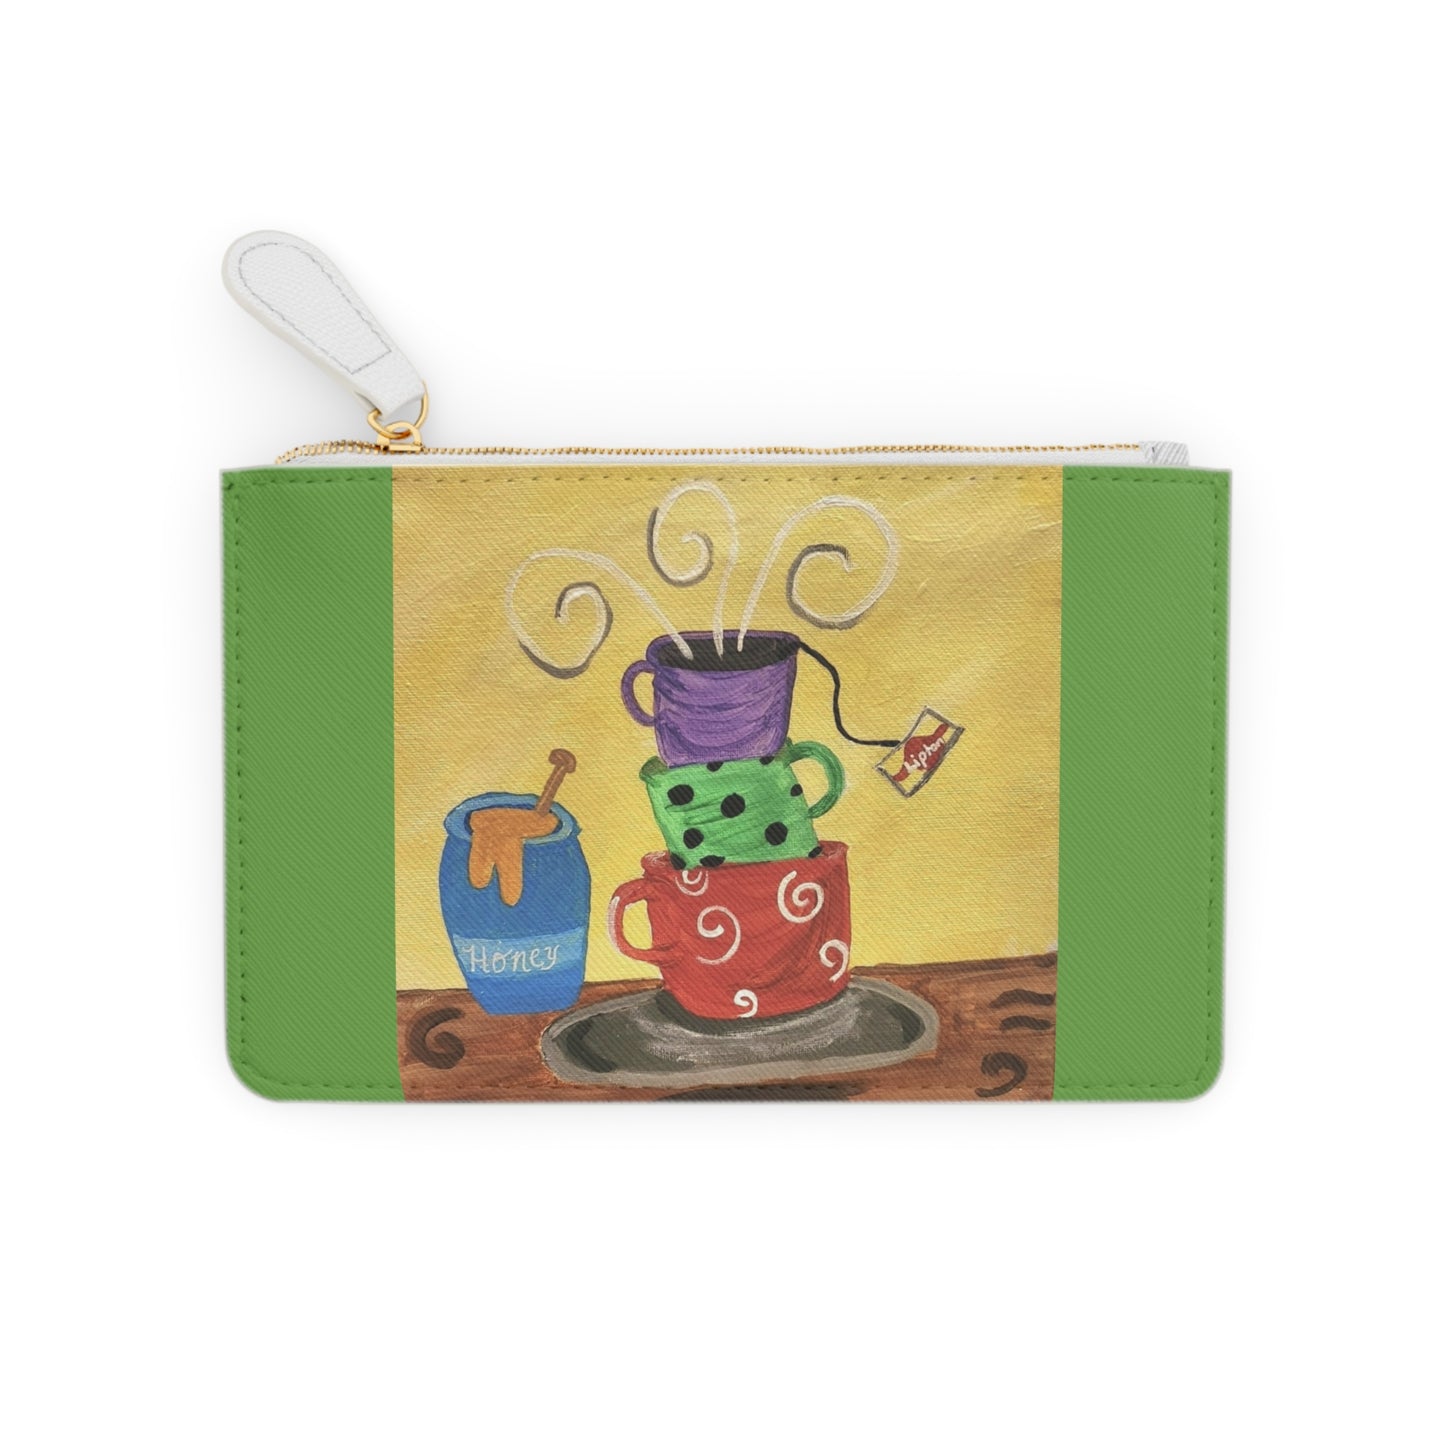 Cup Of Tea Mini Clutch Bag (Brookson Collection) GREEN